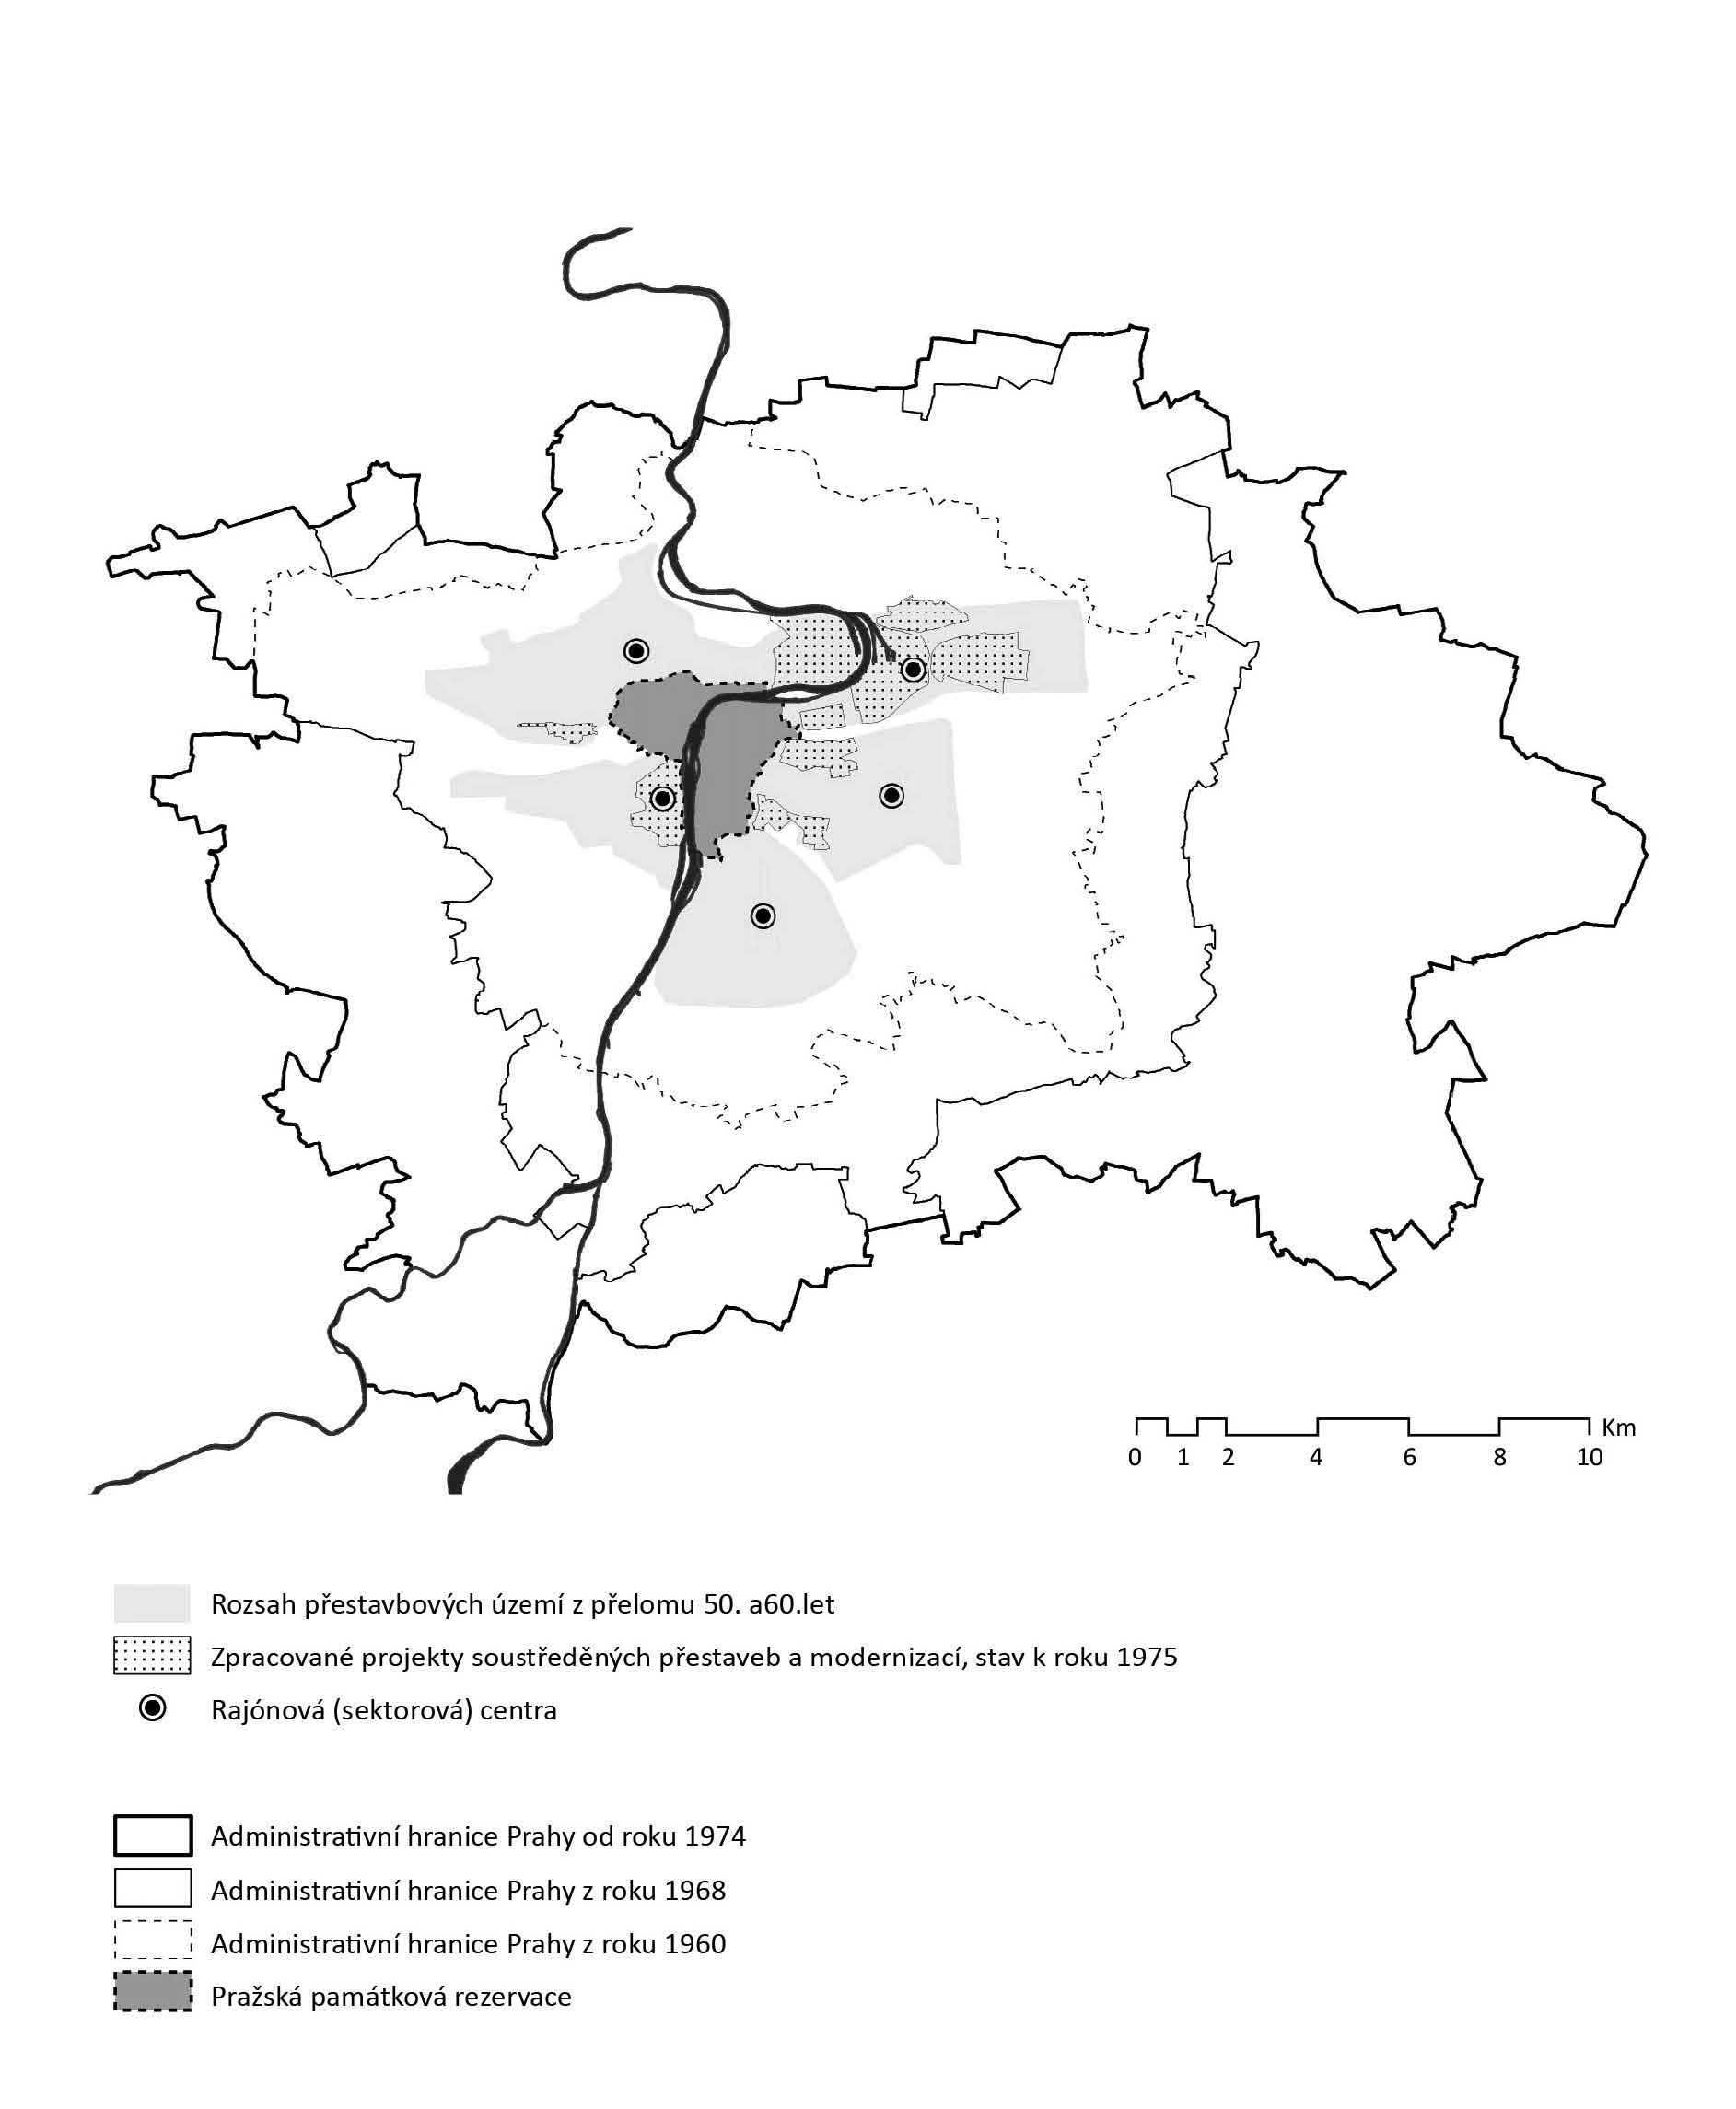 Between Redevelopment and Modernization: The Evolution of Opinions on the Future of Prague’s Gründerzeit Districts between 1958 and 1989